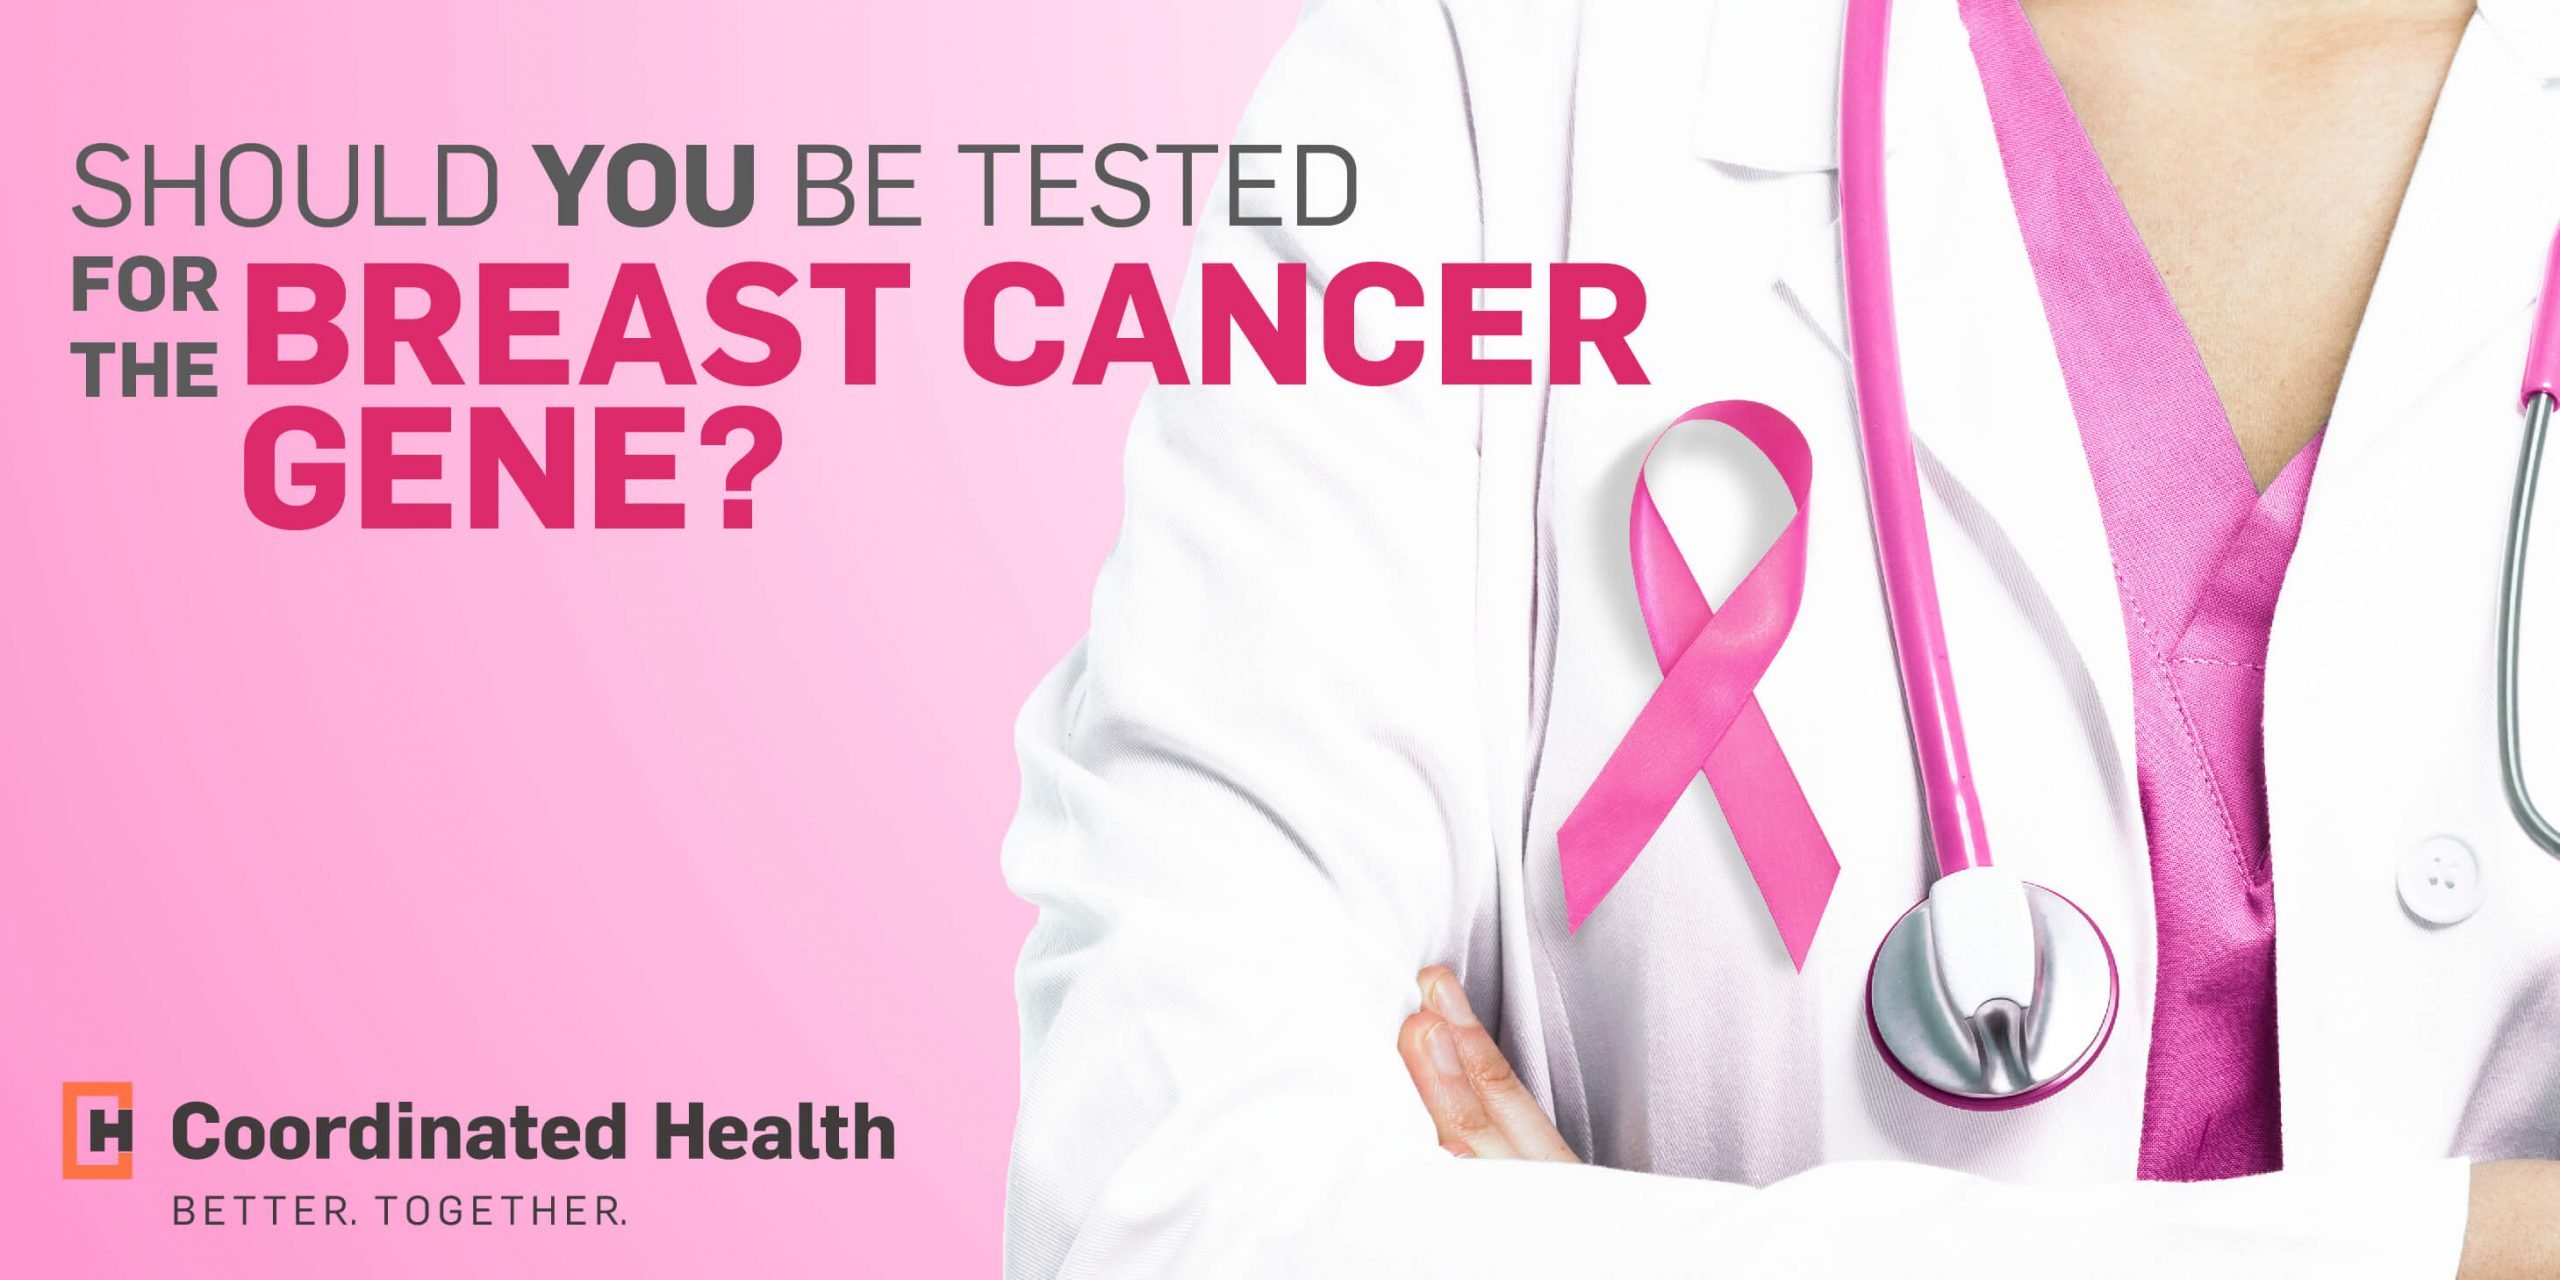 Should You Be Tested For the Breast Cancer Gene ...